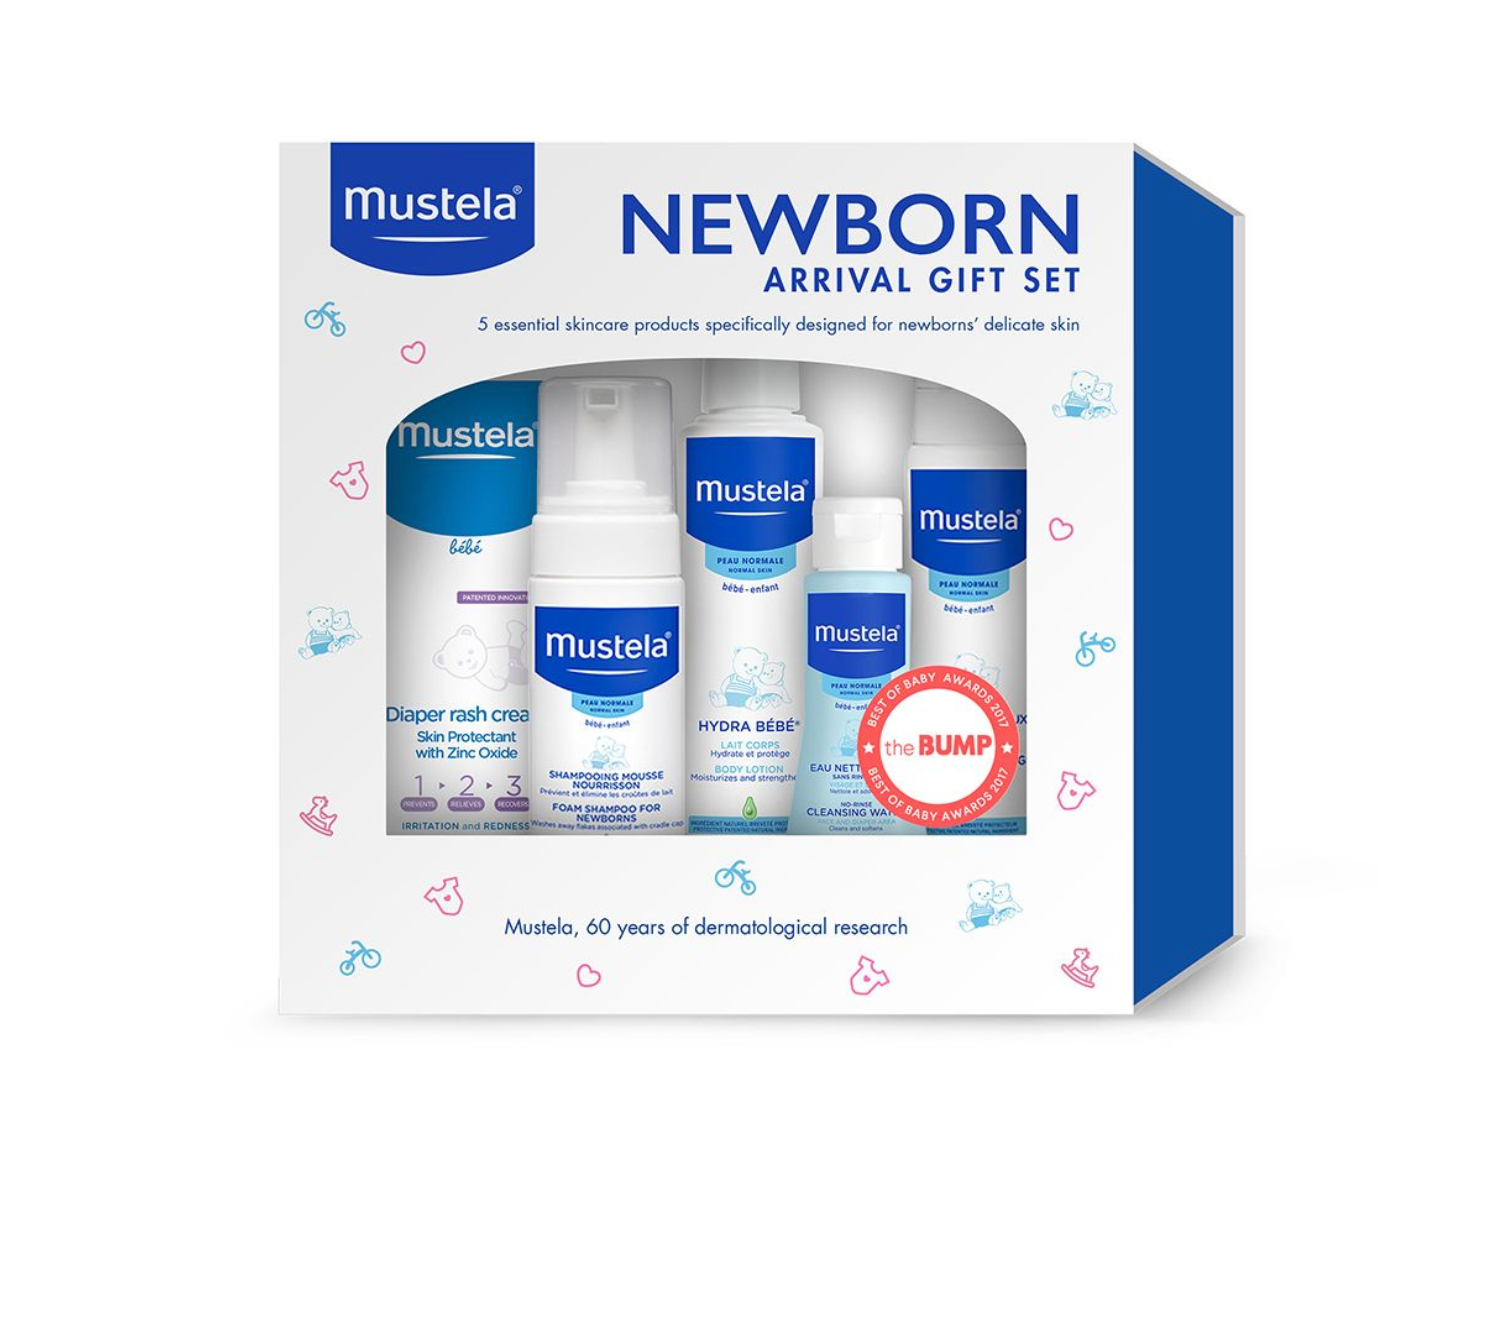 Newborn Arrival Gift Set - 5 Natural Skincare Products